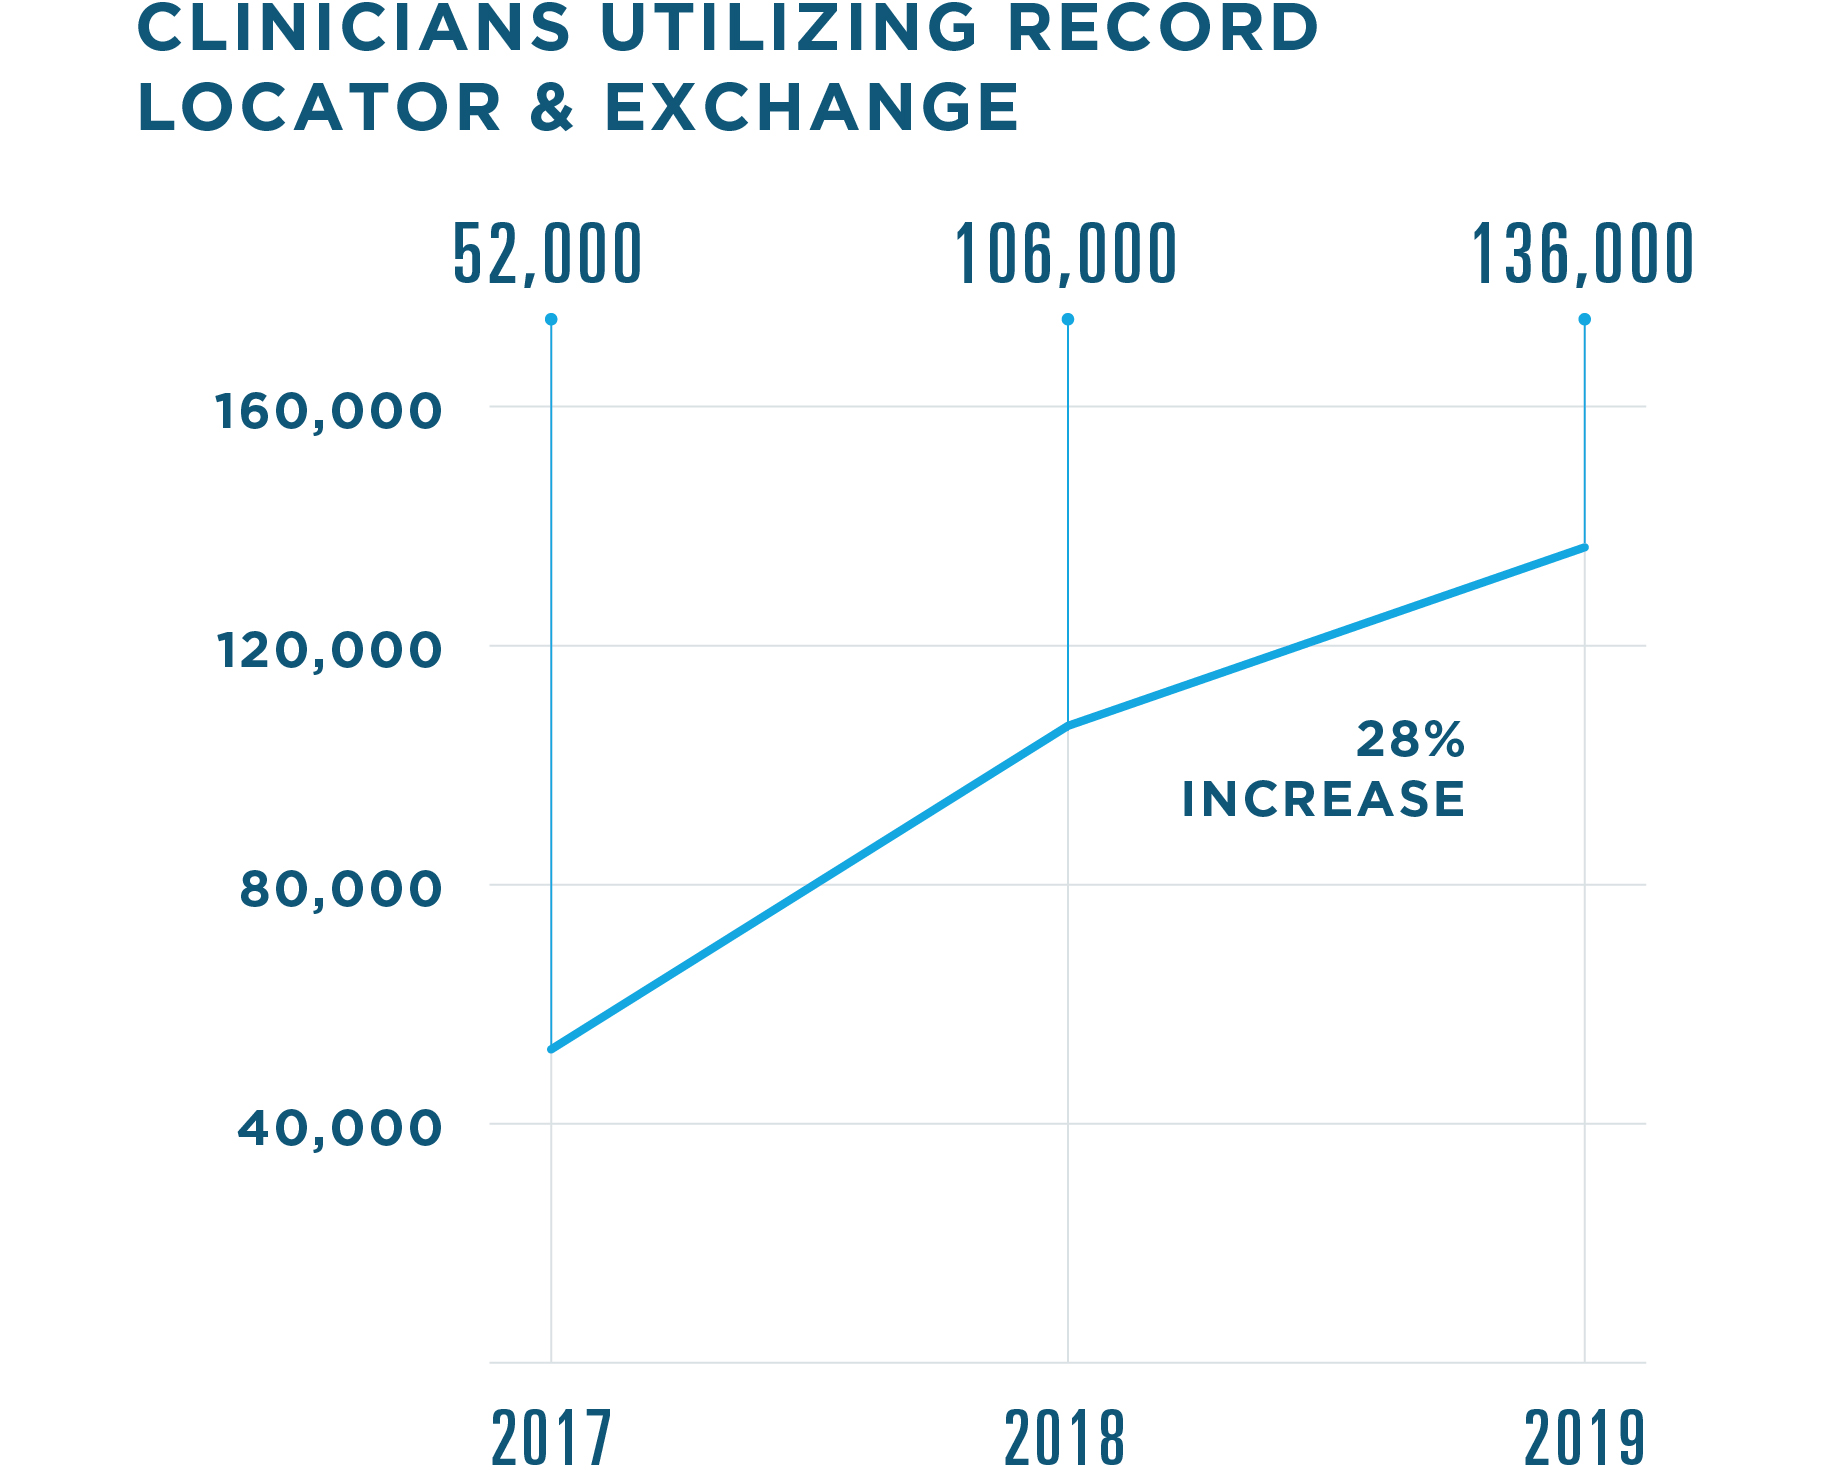 136,000 clinicians utilized Record Locator & Exchange in 2019, a 28% increase from 106,000 in 2018. 52,000 used the service in 2017.